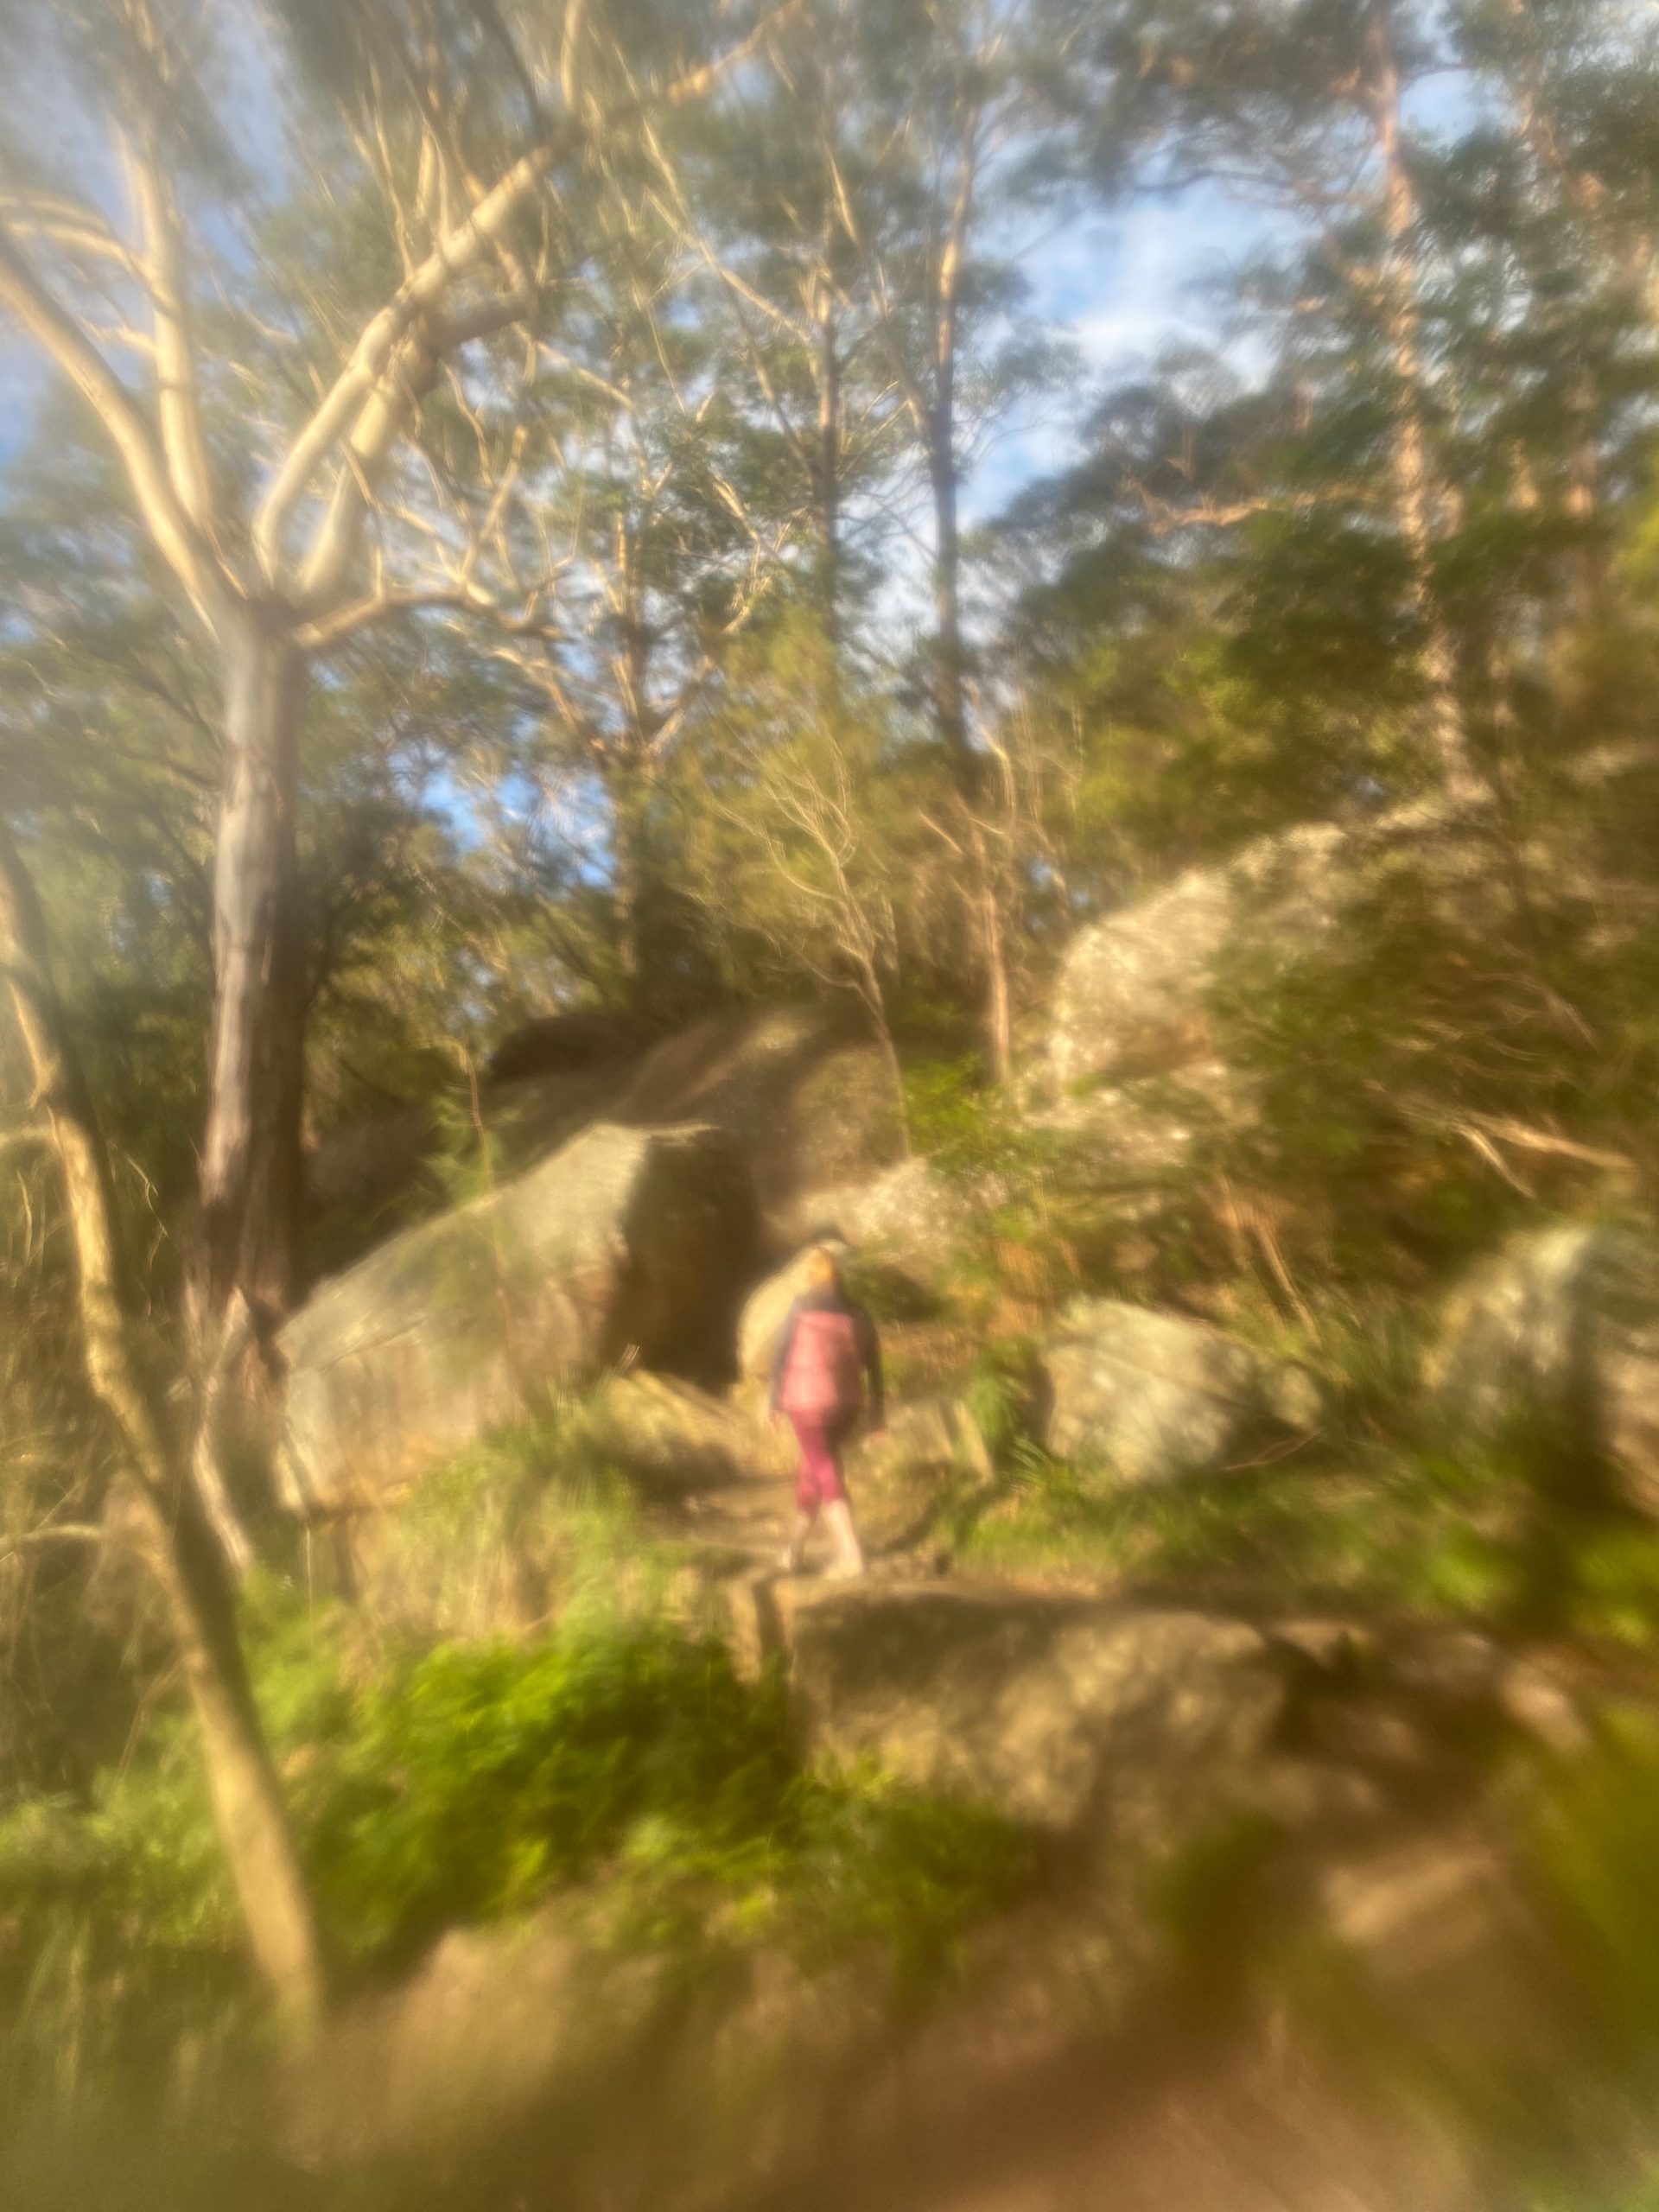 Using plastic as a real life filter - a person walking in a national park. Photo: Tim Ashelford